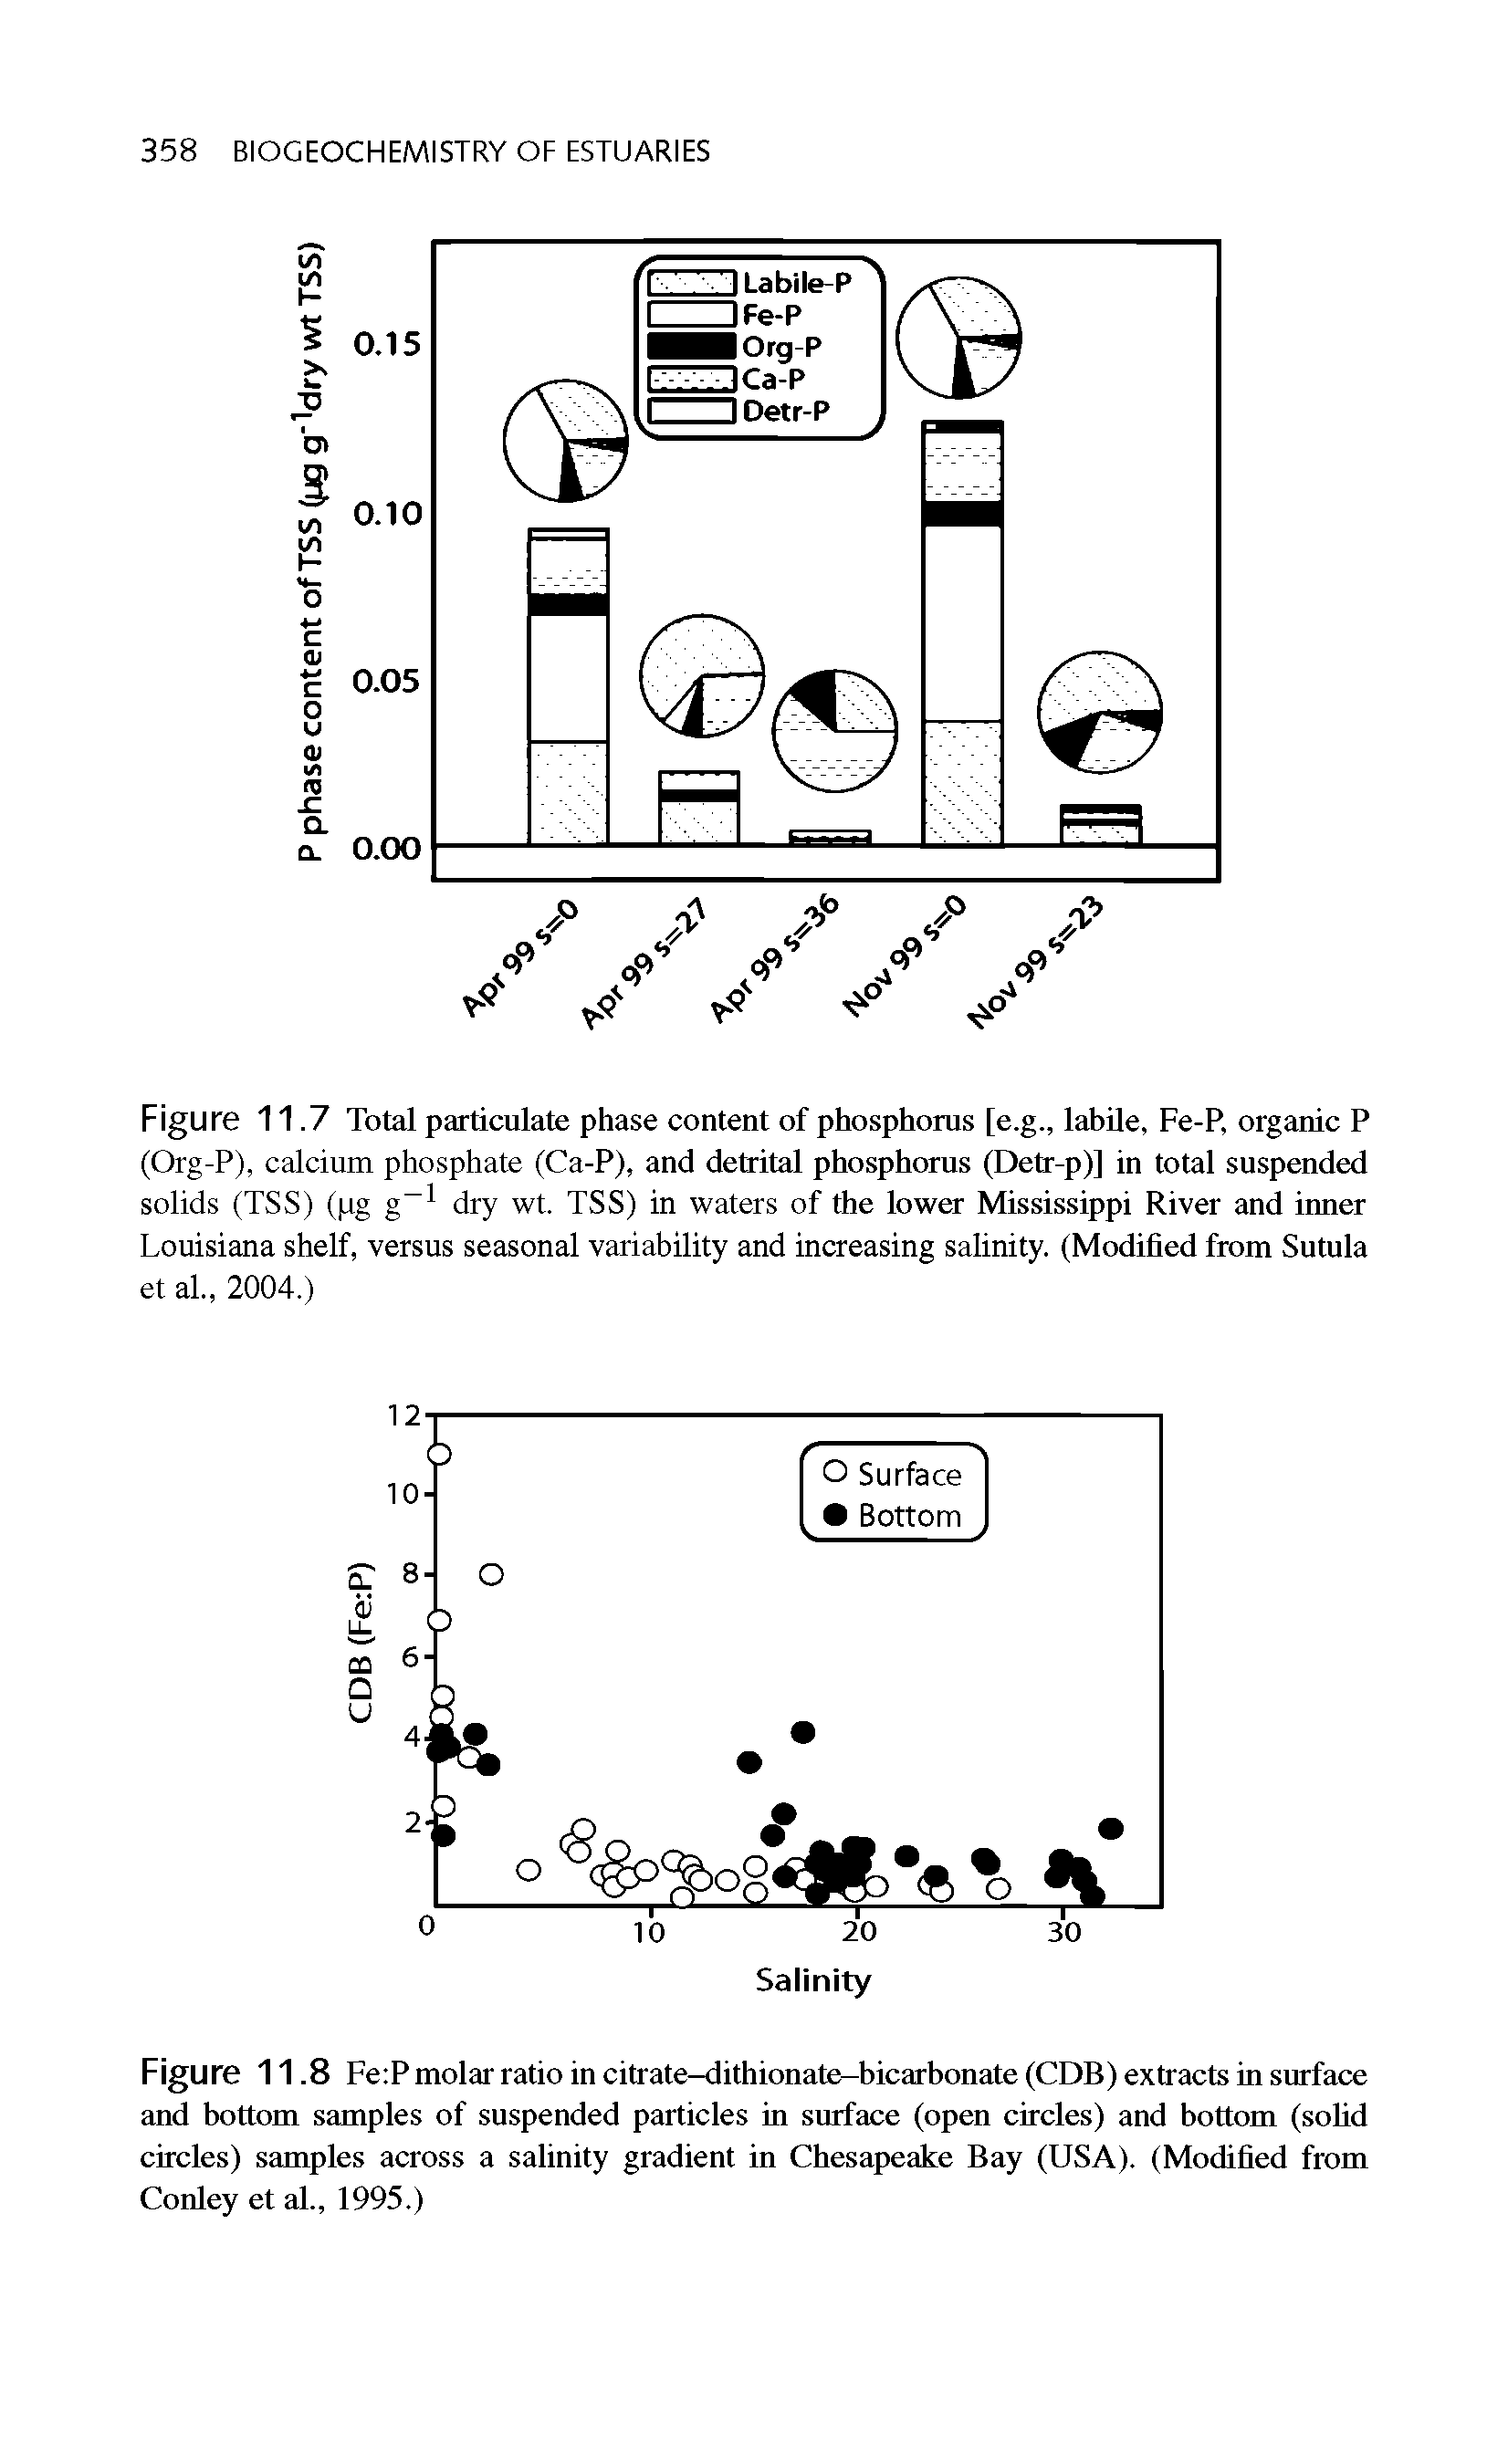 Figure 11.7 Total particulate phase content of phosphorus [e.g., labile, Fe-P, organic P (Org-P), calcium phosphate (Ca-P), and detrital phosphorus (Detr-p)] in total suspended solids (TSS) (pg g-1 dry wt. TSS) in waters of the lower Mississippi River and inner Louisiana shelf, versus seasonal variability and increasing salinity. (Modified from Sutula et al 2004.)...